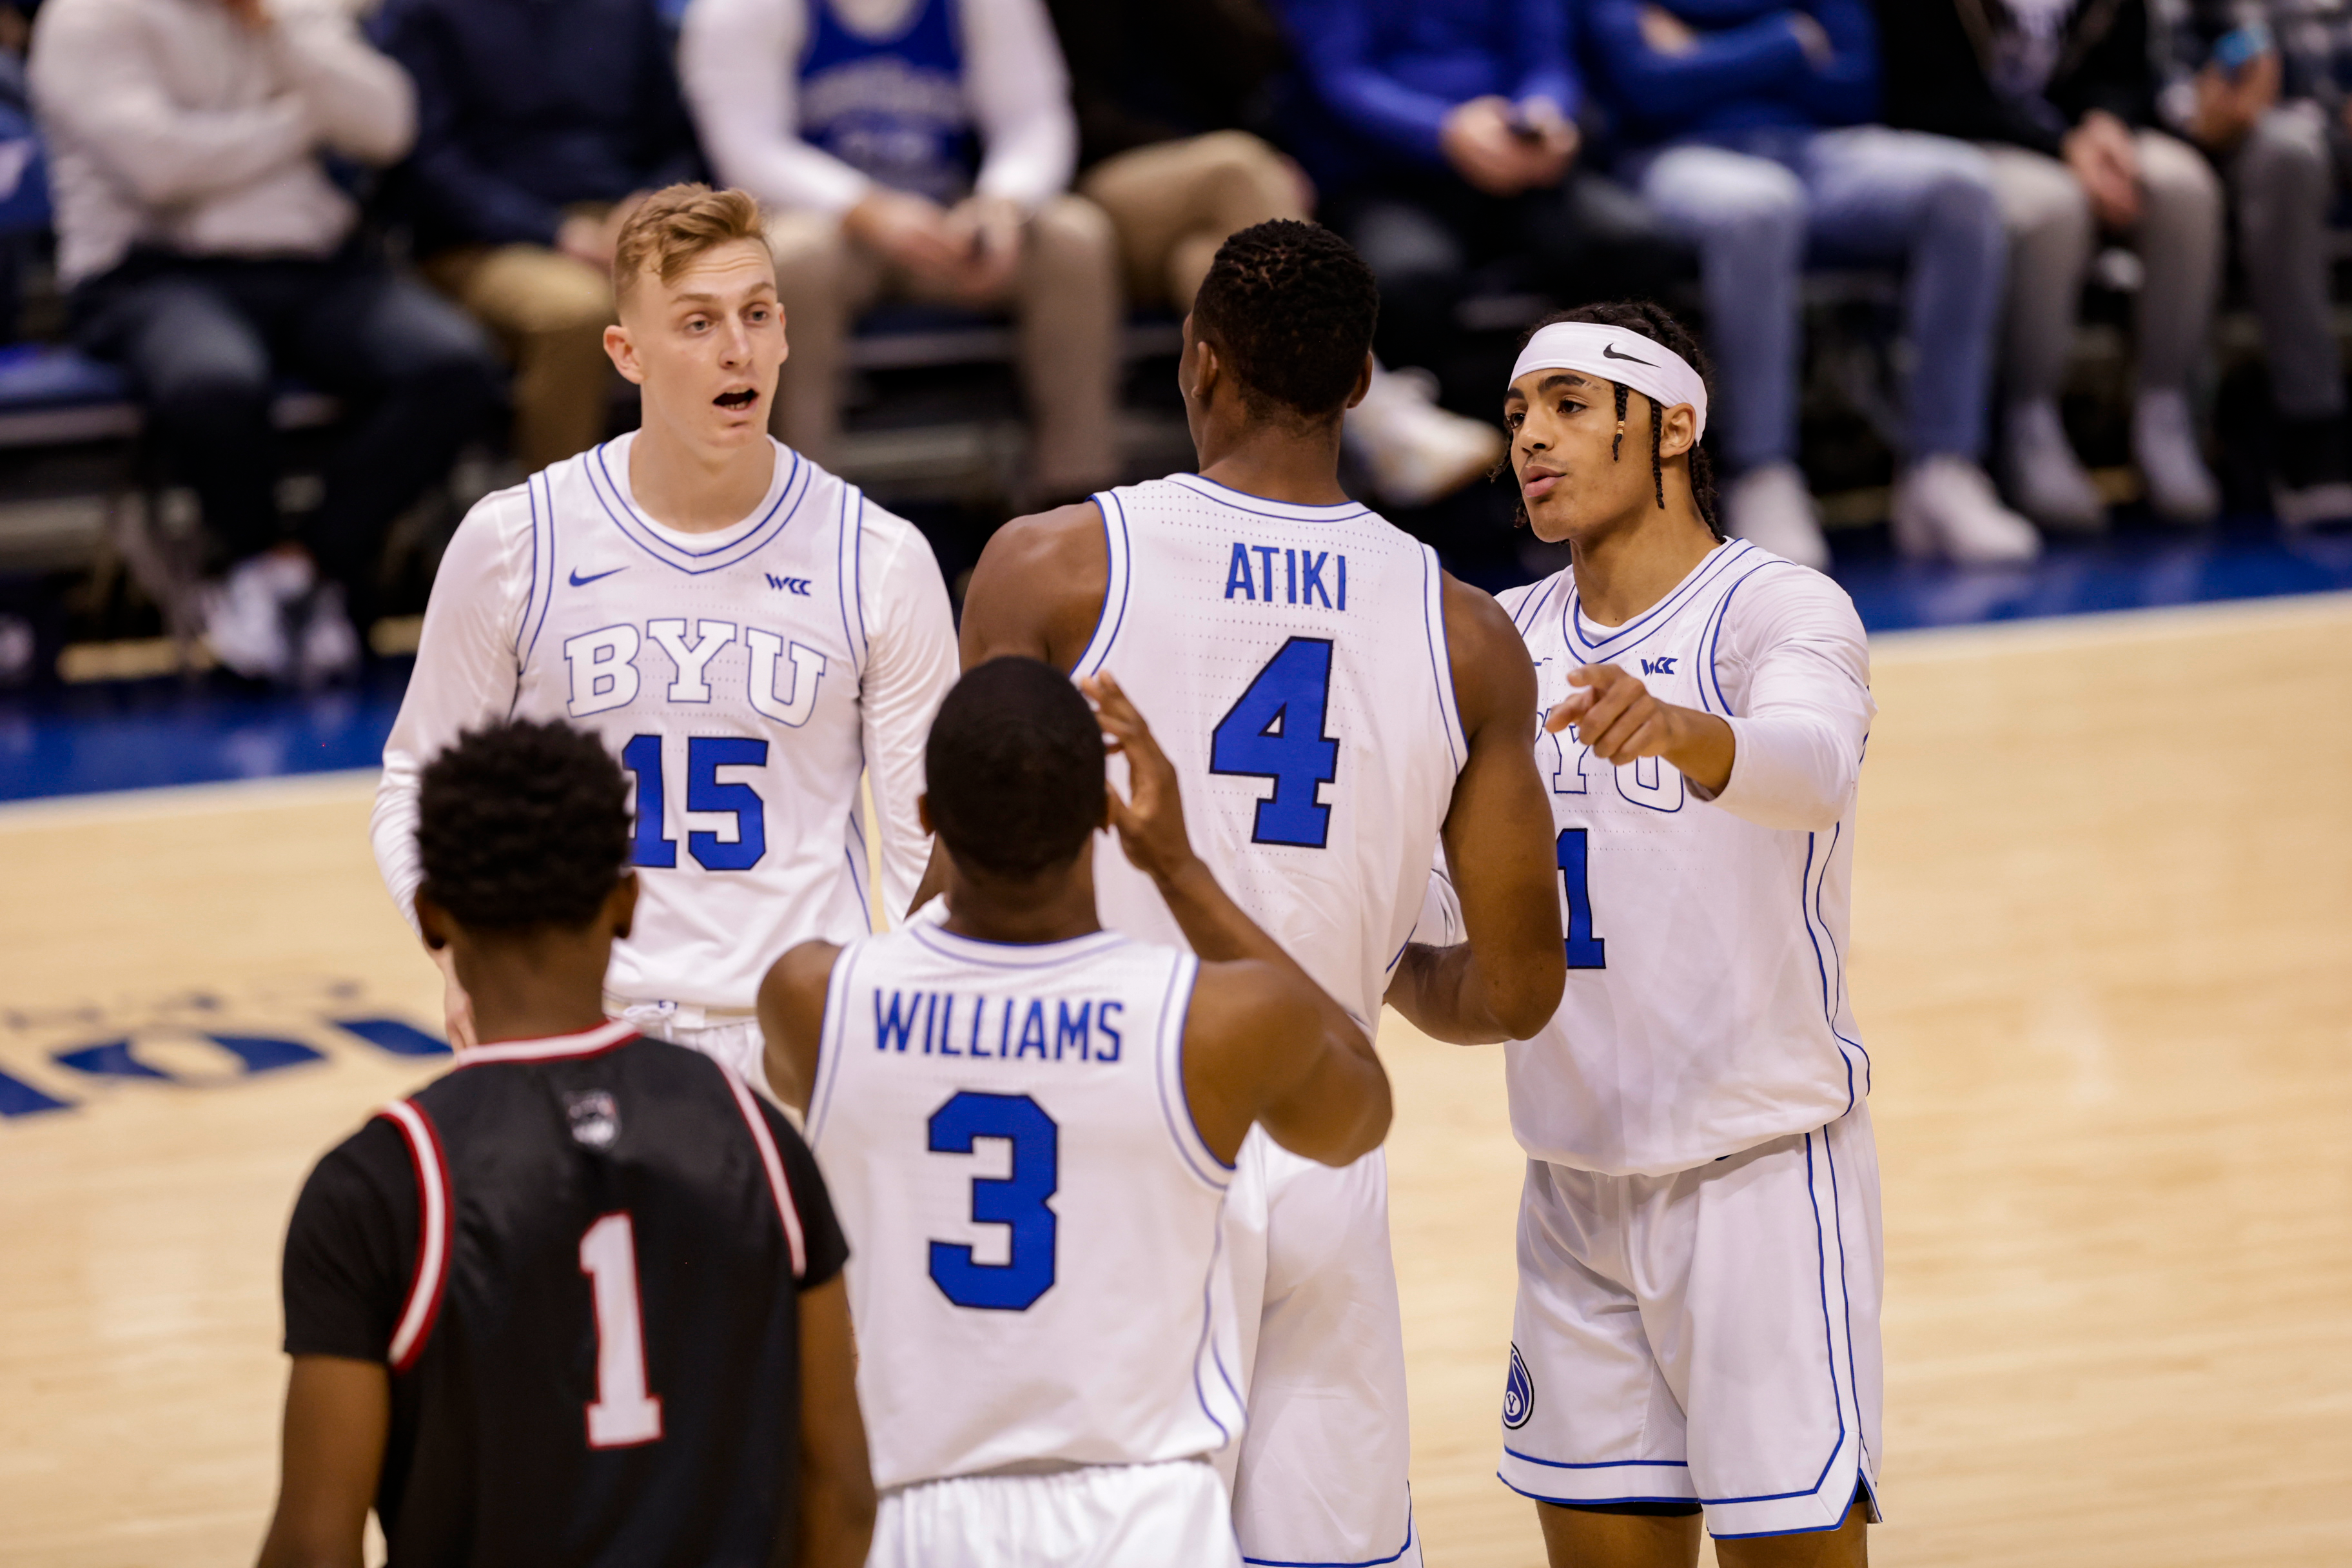 The team meets between free throws during a game against Western Oregon at the Marriott Center.